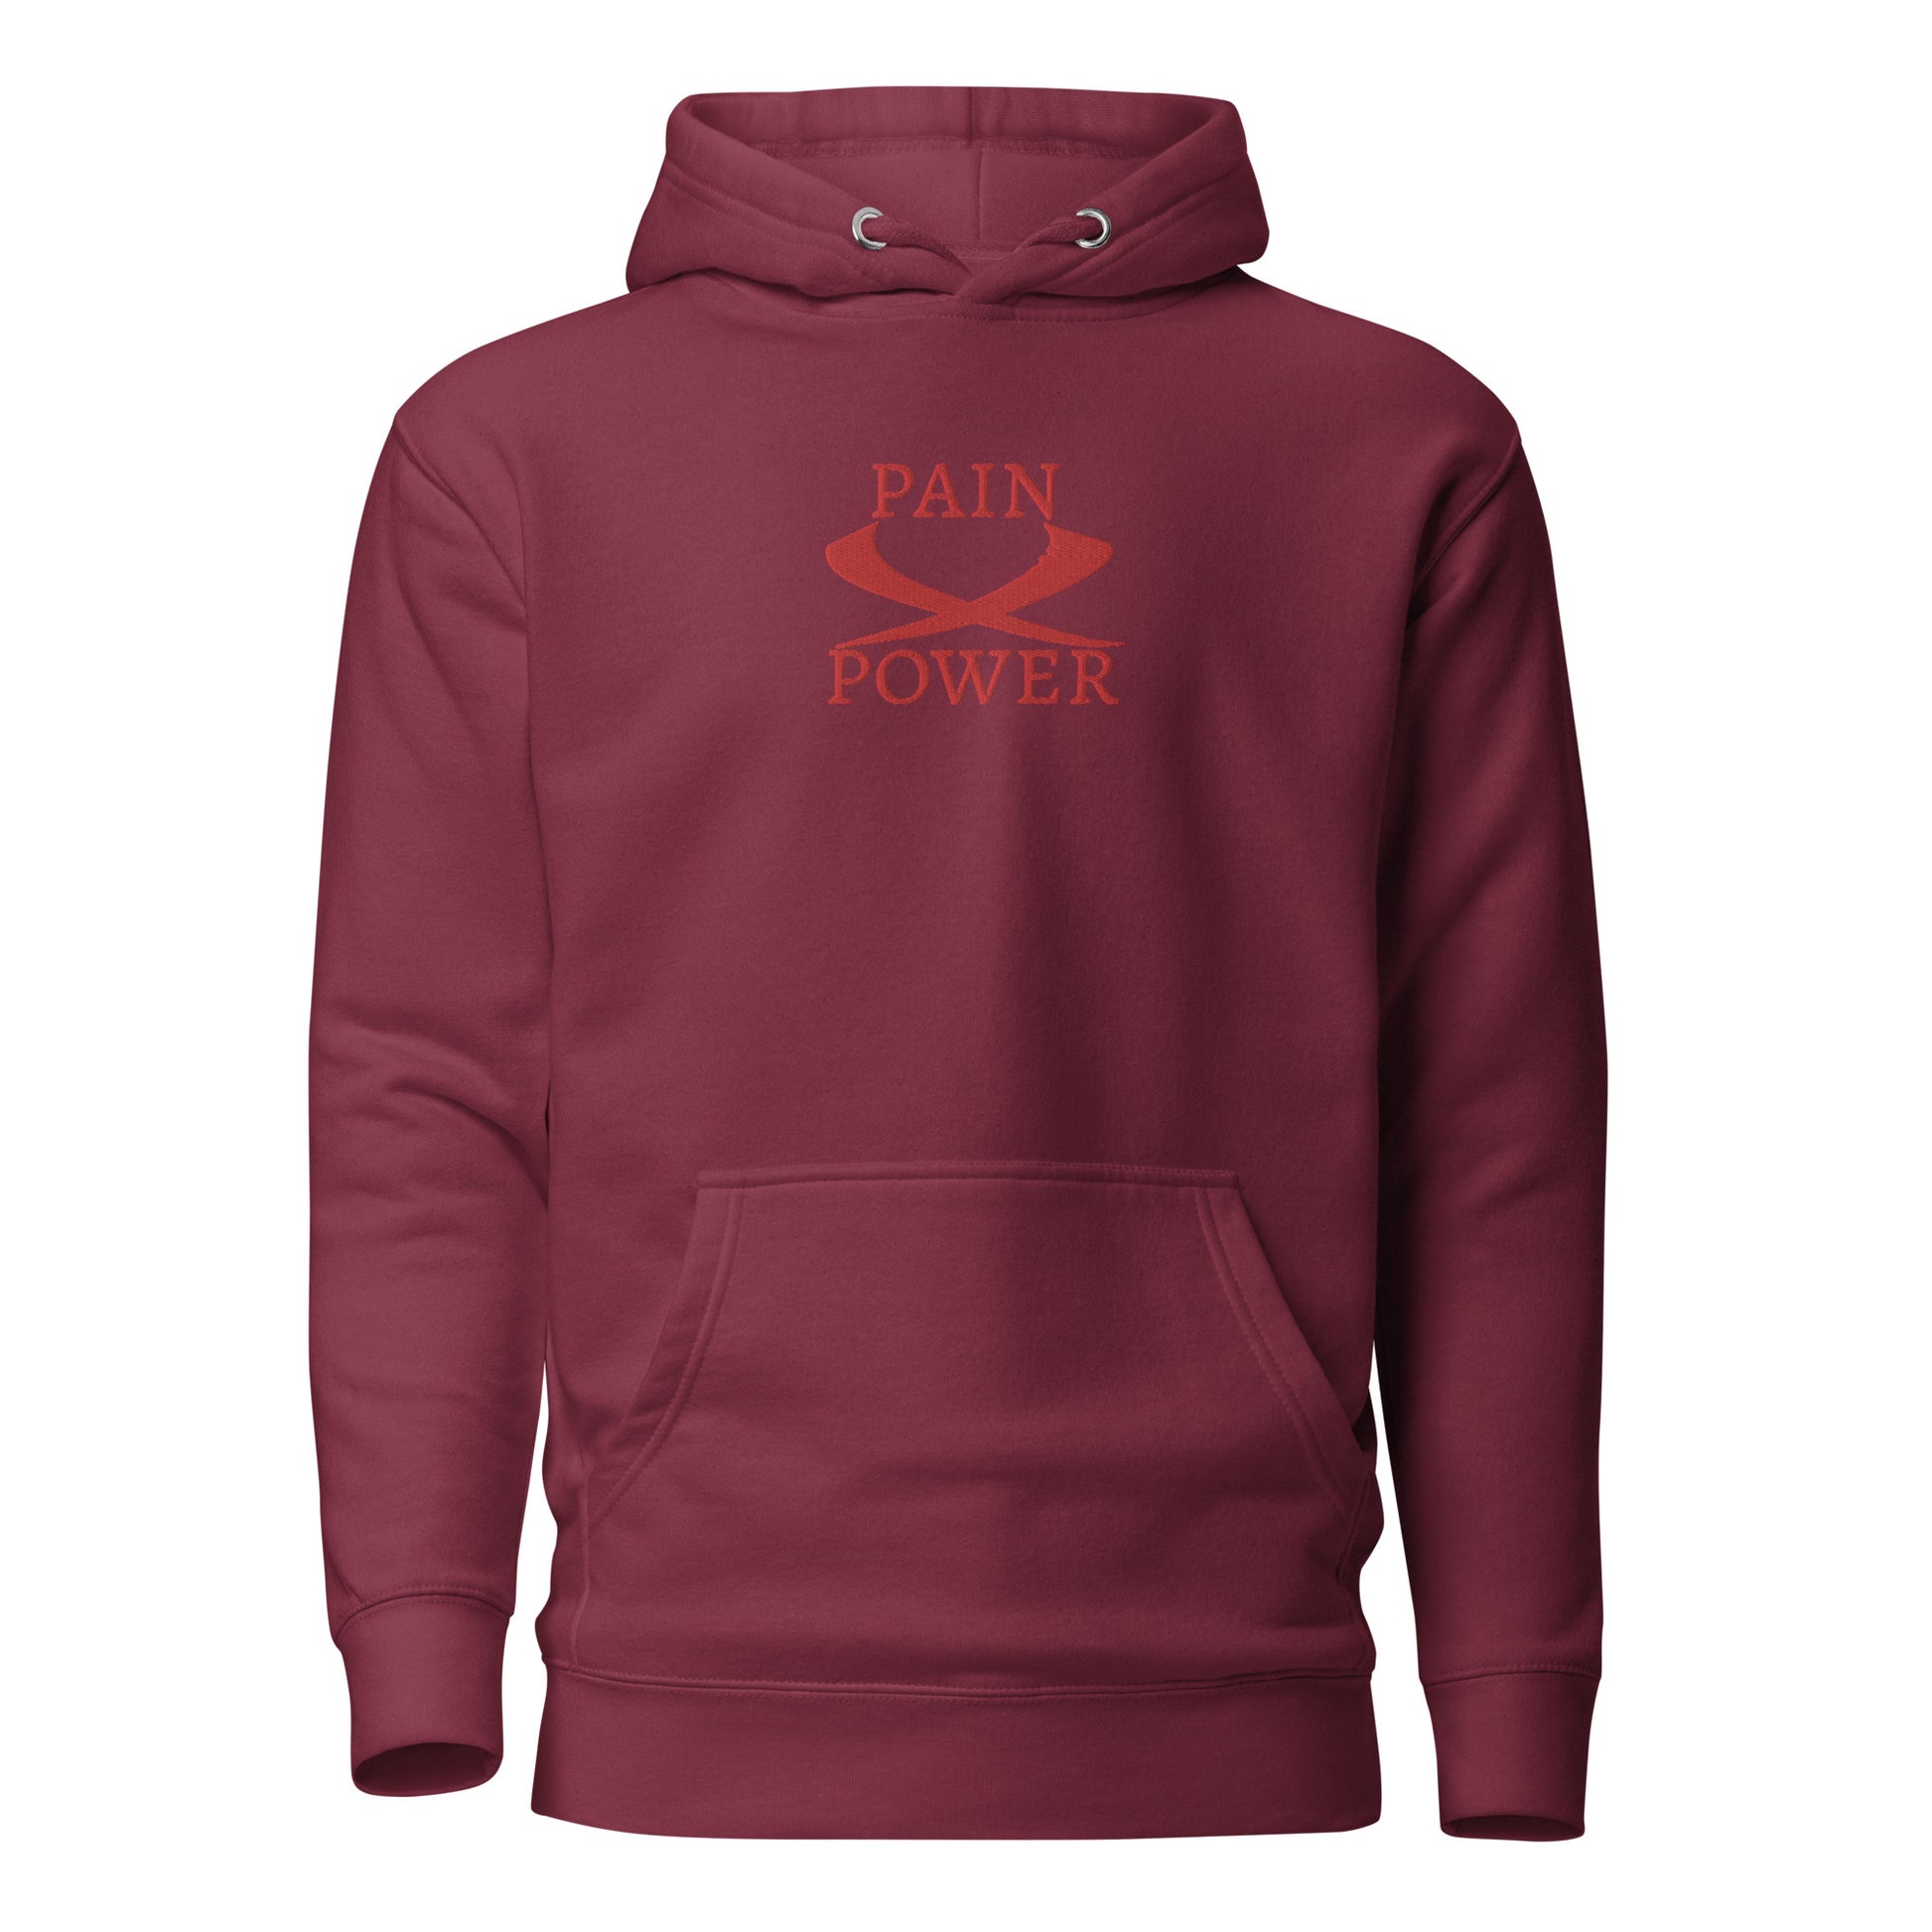 maroon  wrath    hoodie with pain and power embroidered at the center chest